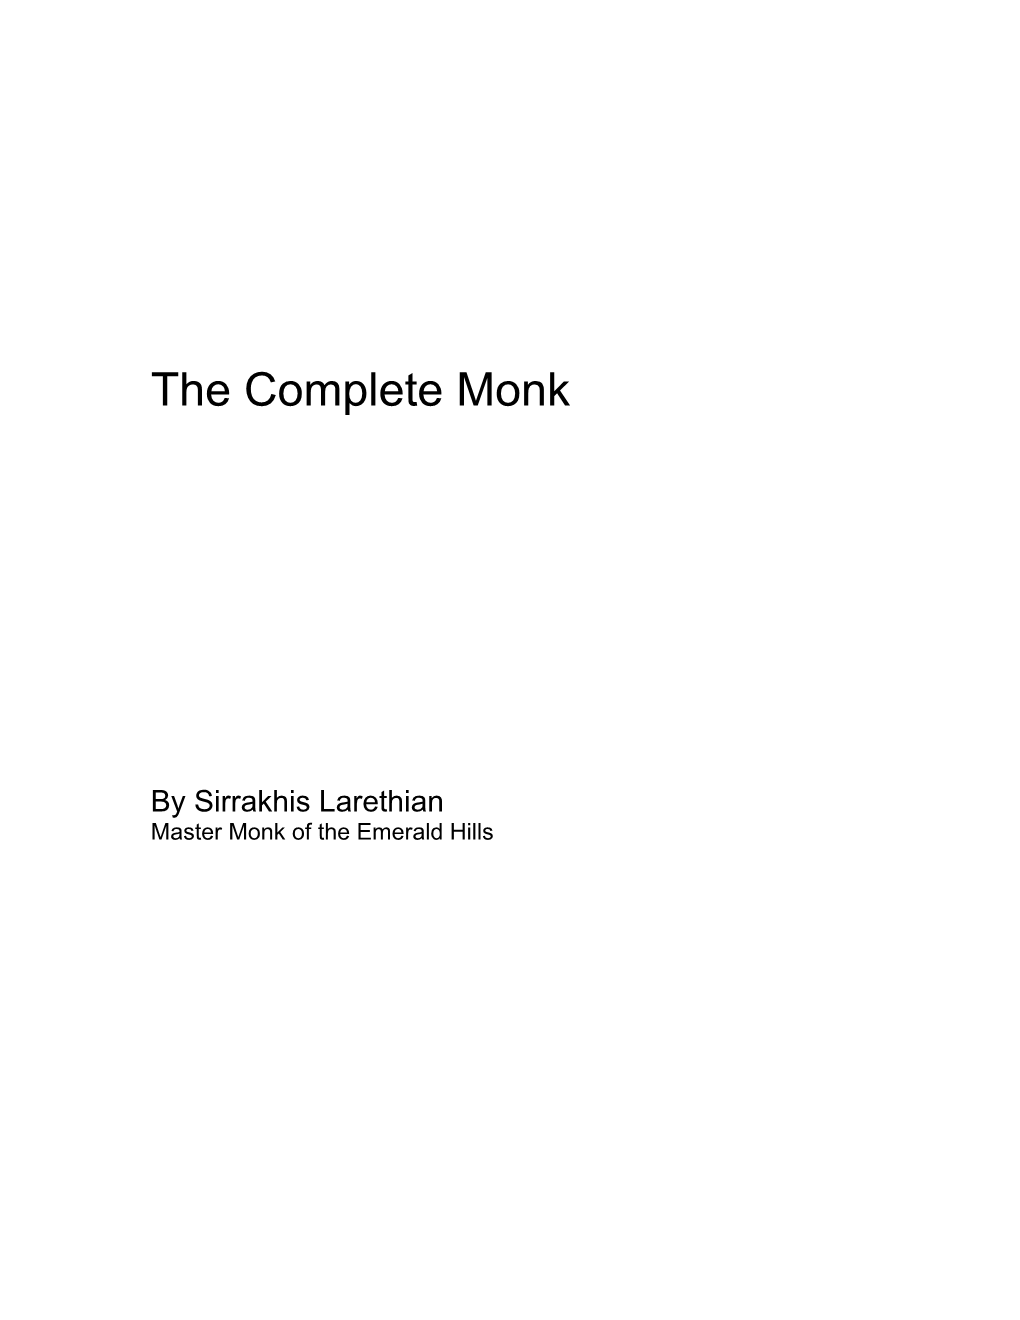 The Complete Monk